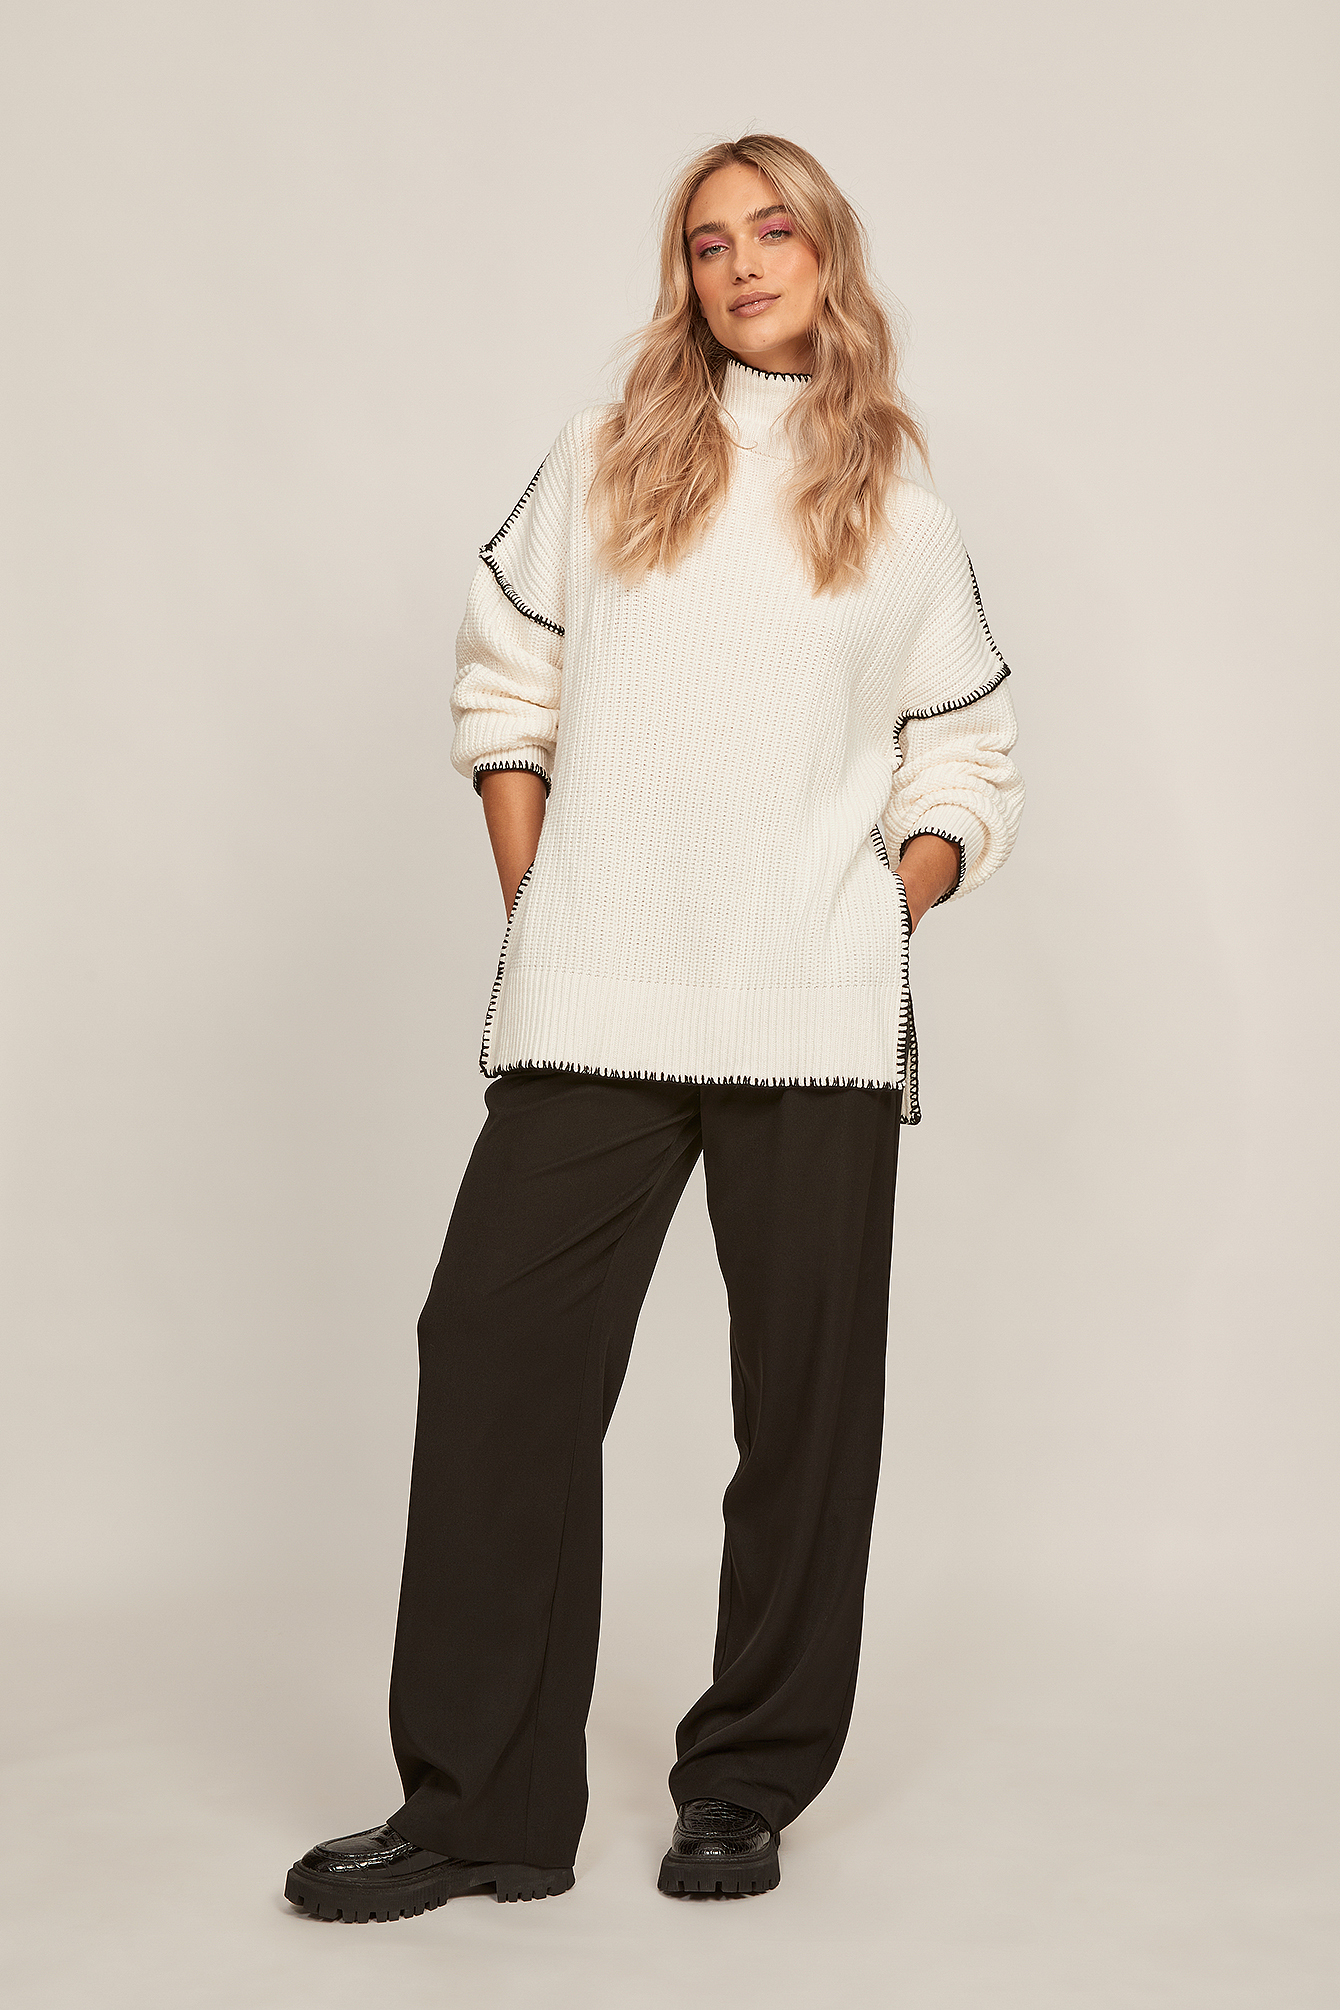 Offwhite Contrast Seam High Neck Knitted Sweater